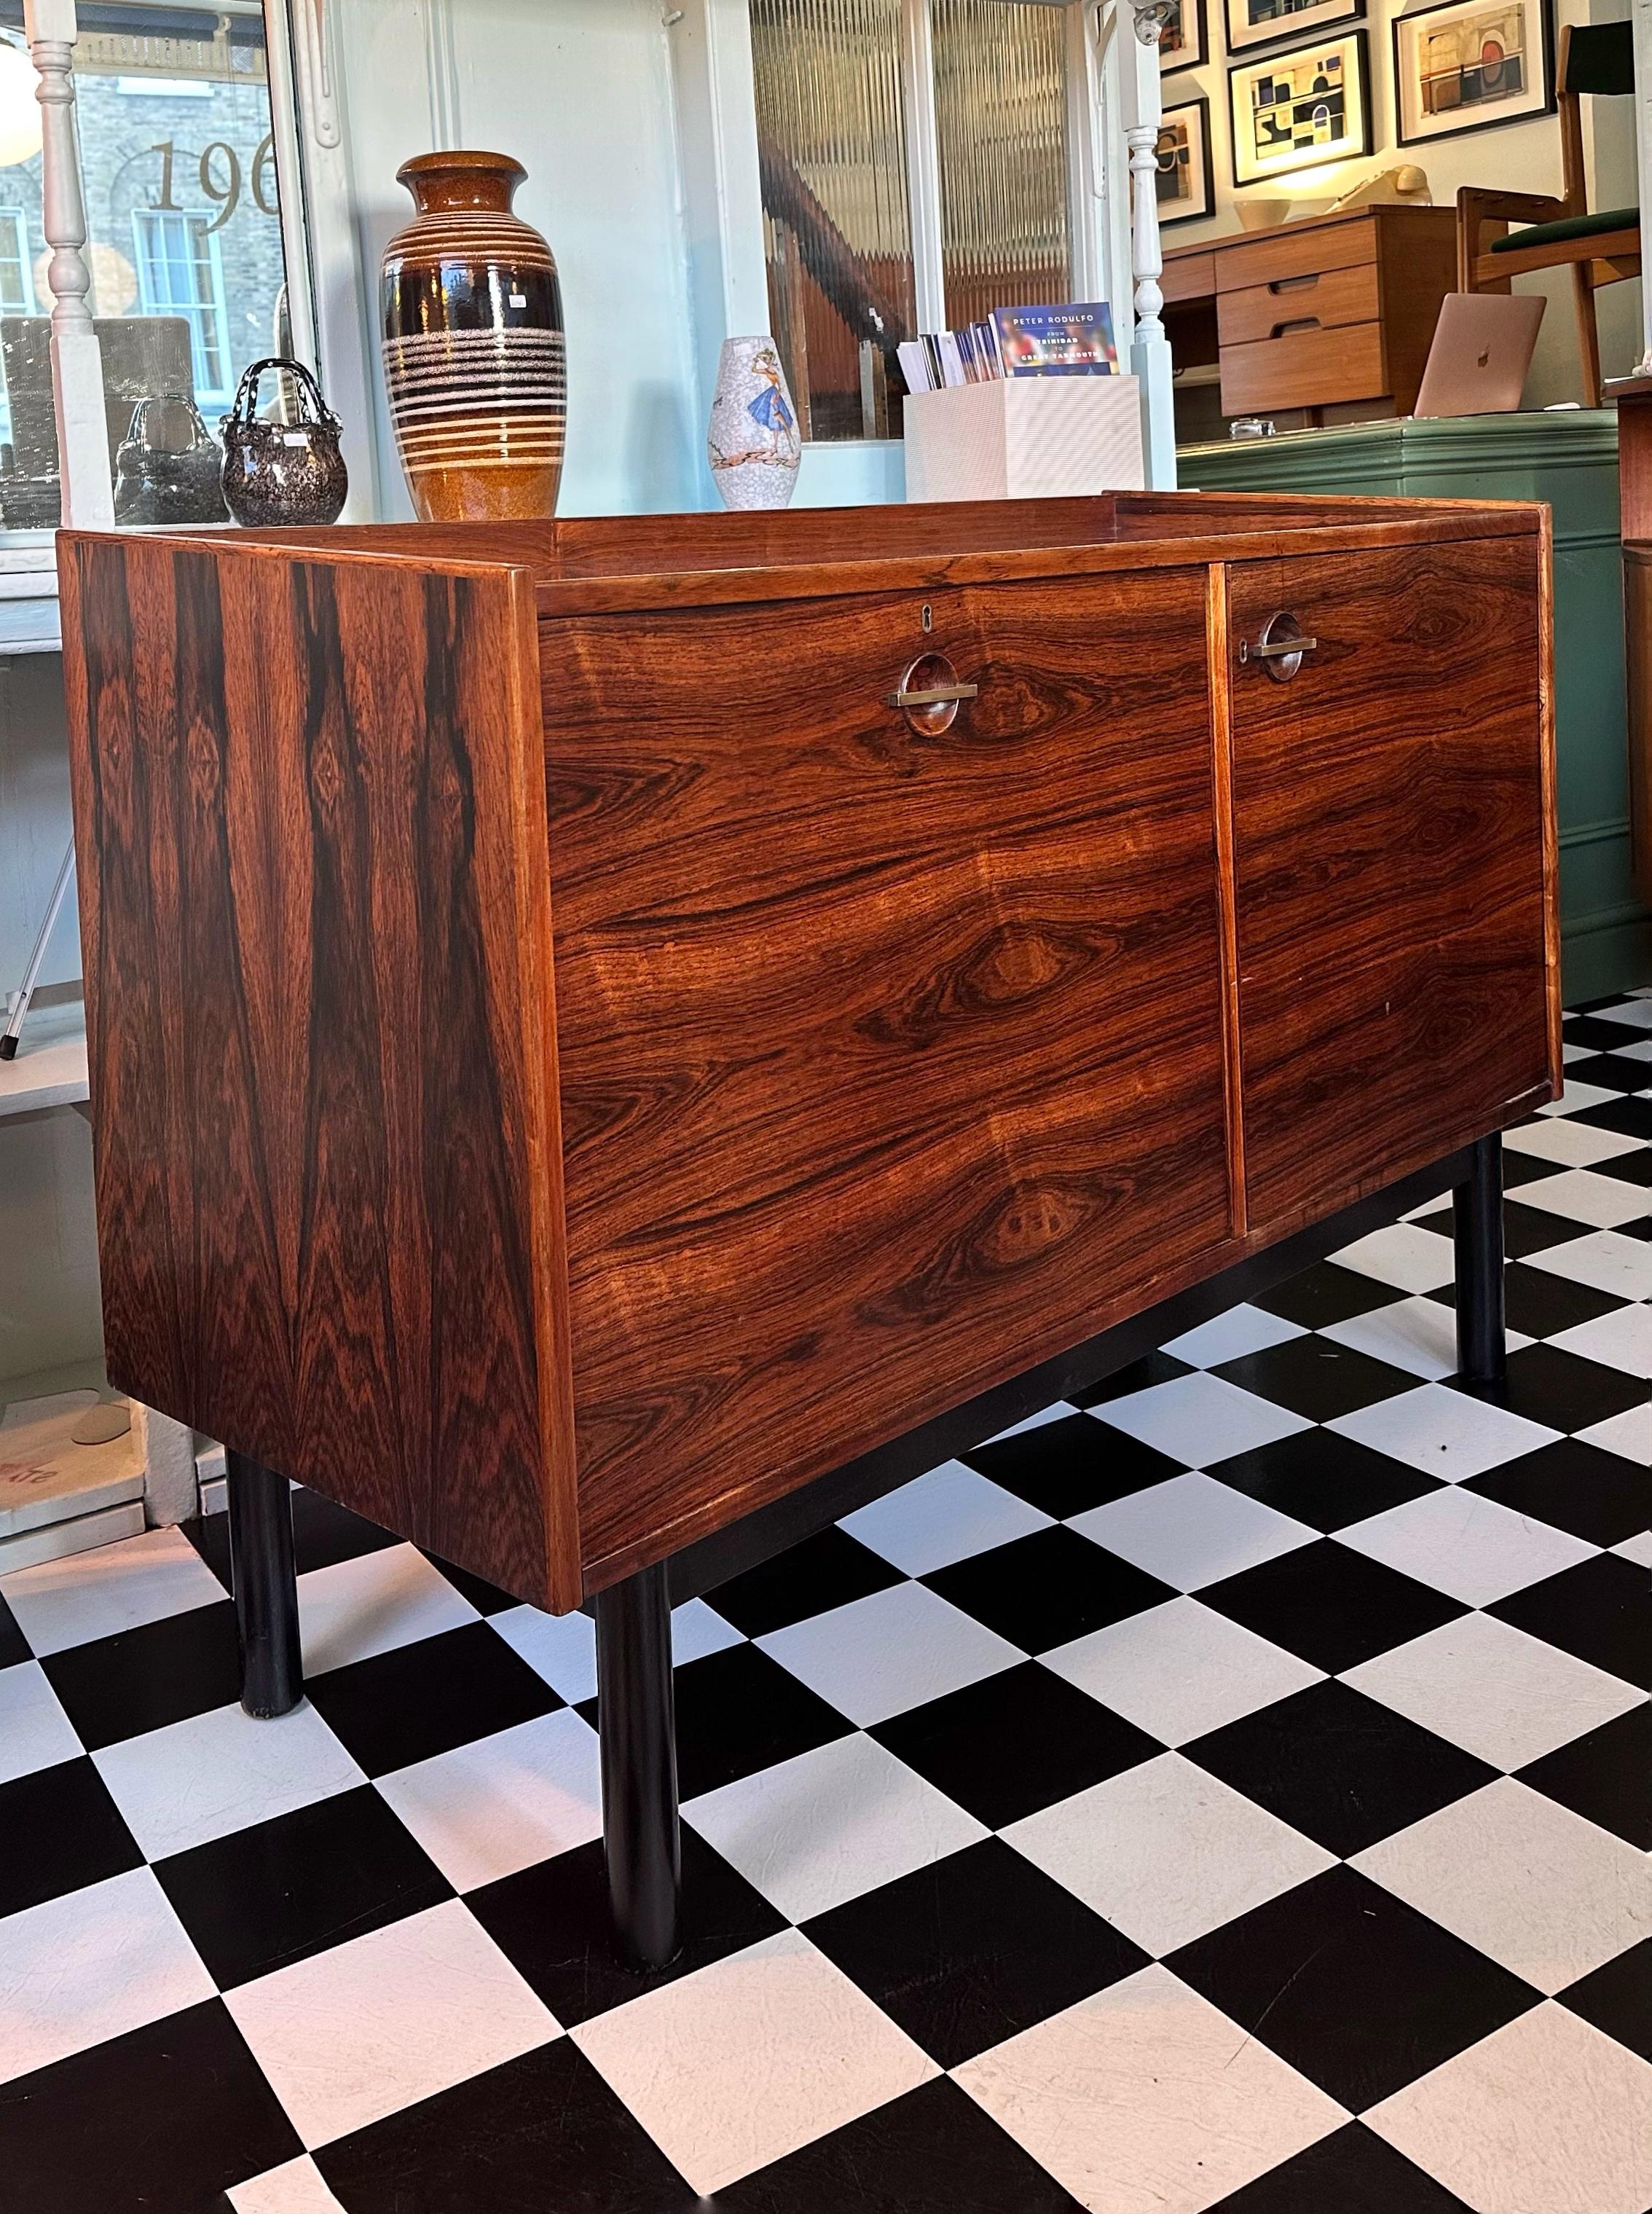 
This 1960’s Mid-Century Danish Rosewood Drinks Cabinet is truly a show-stopping piece that is guaranteed to be the talking point of any room. Crafted from rosewood, this exquisite vintage bar cabinet features stunning wood grain and elegant design